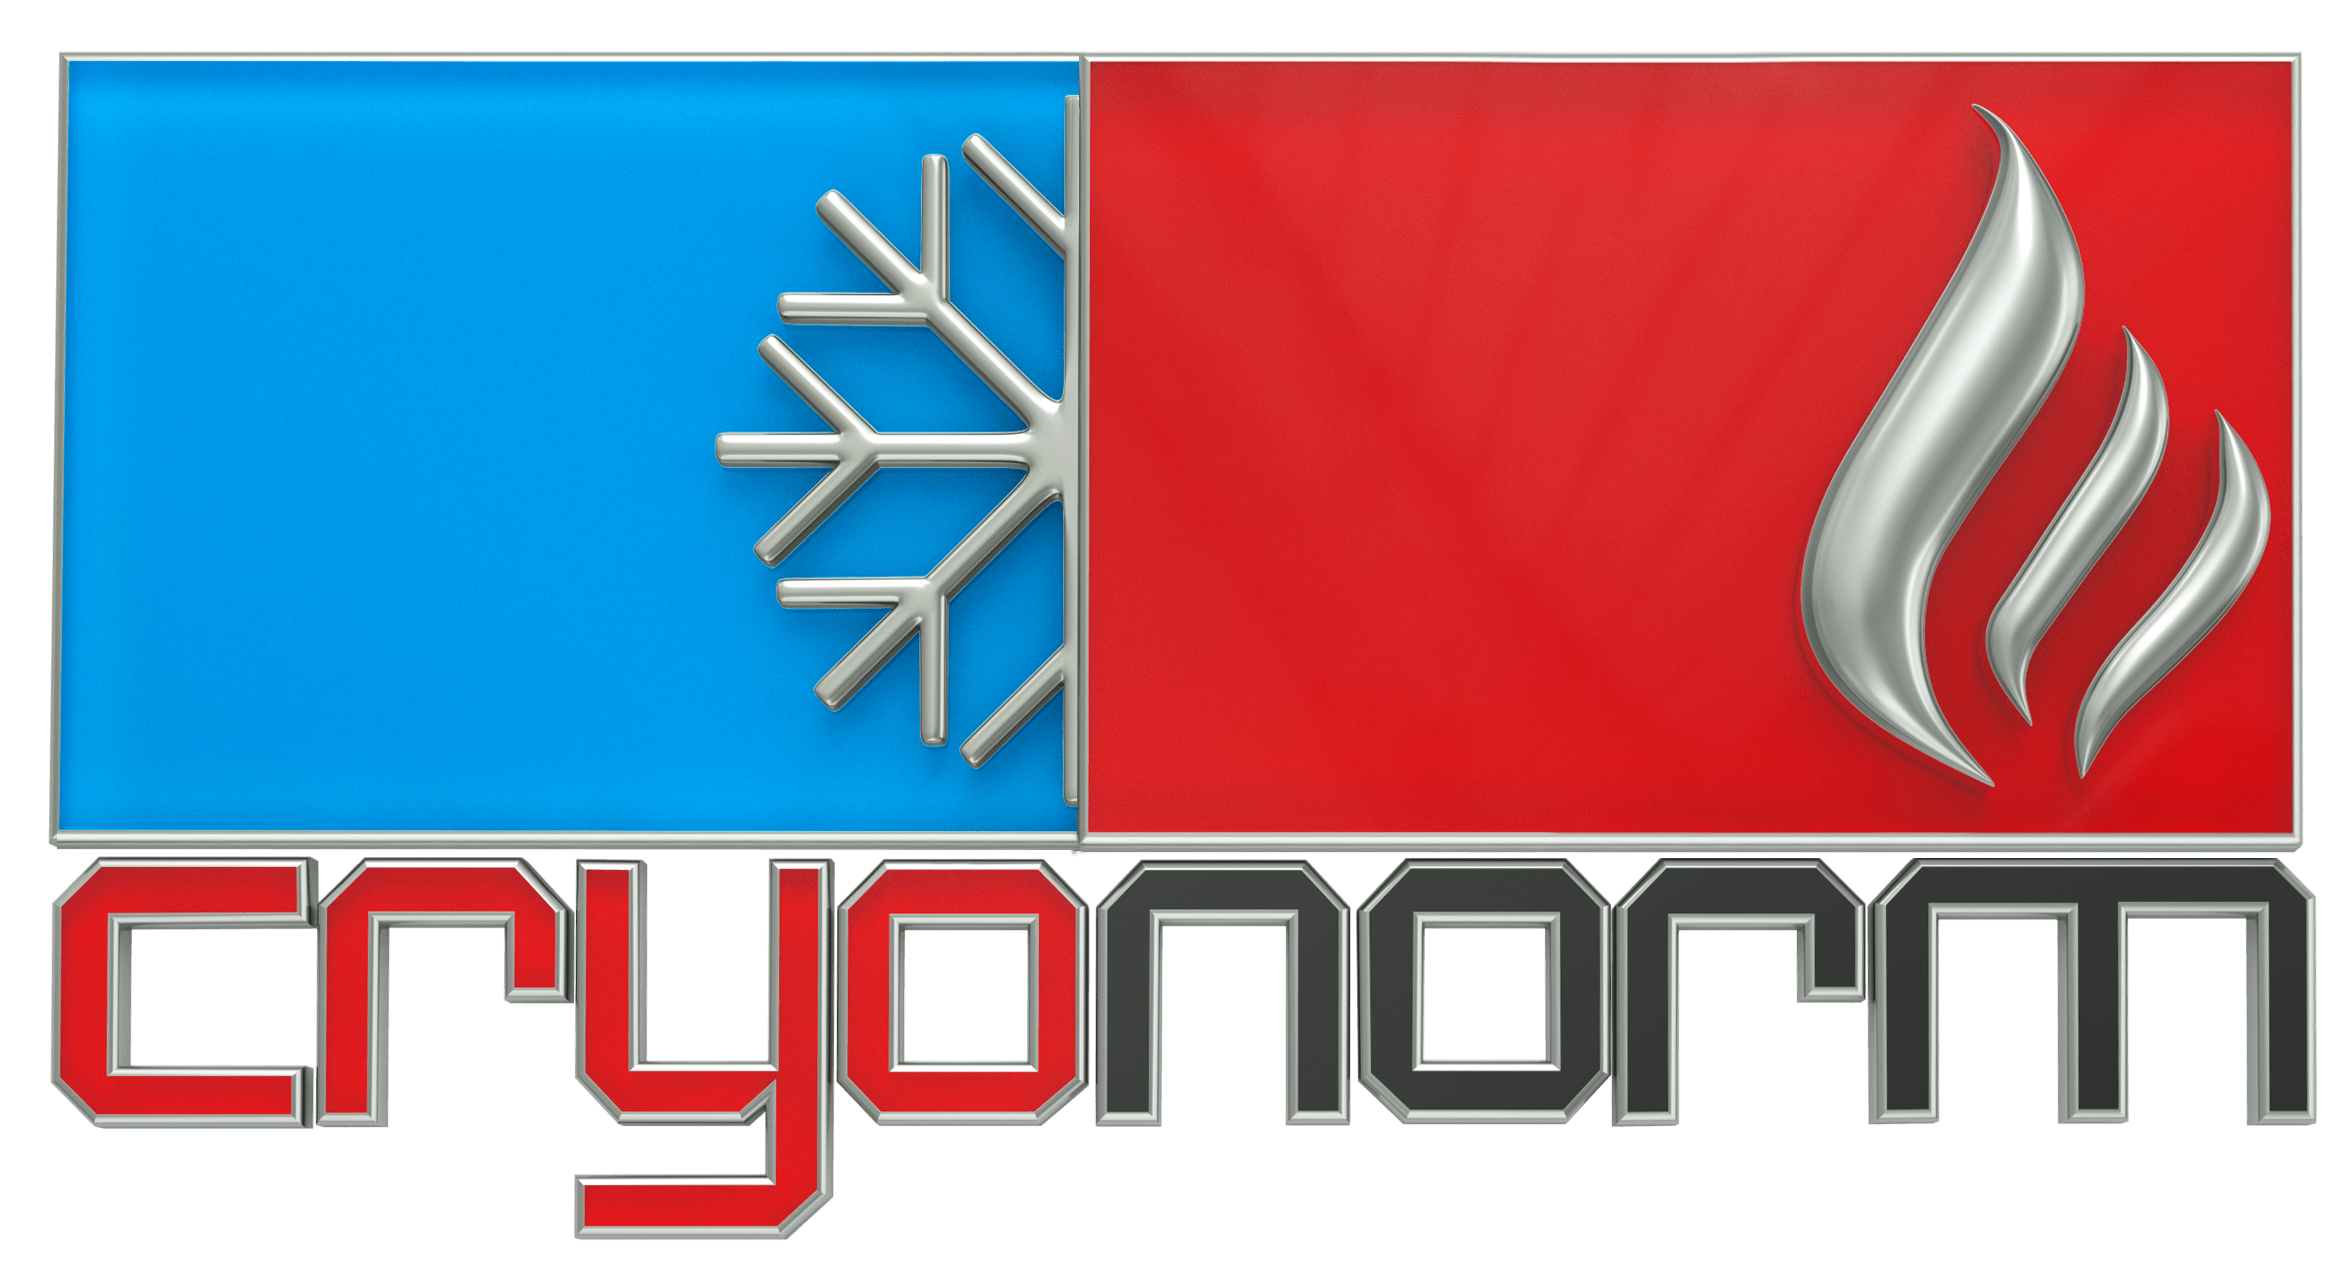 Cryogenic Logo - Cryogenic vaporizers and plants for Air Gases and LNG. Cryonorm B.V